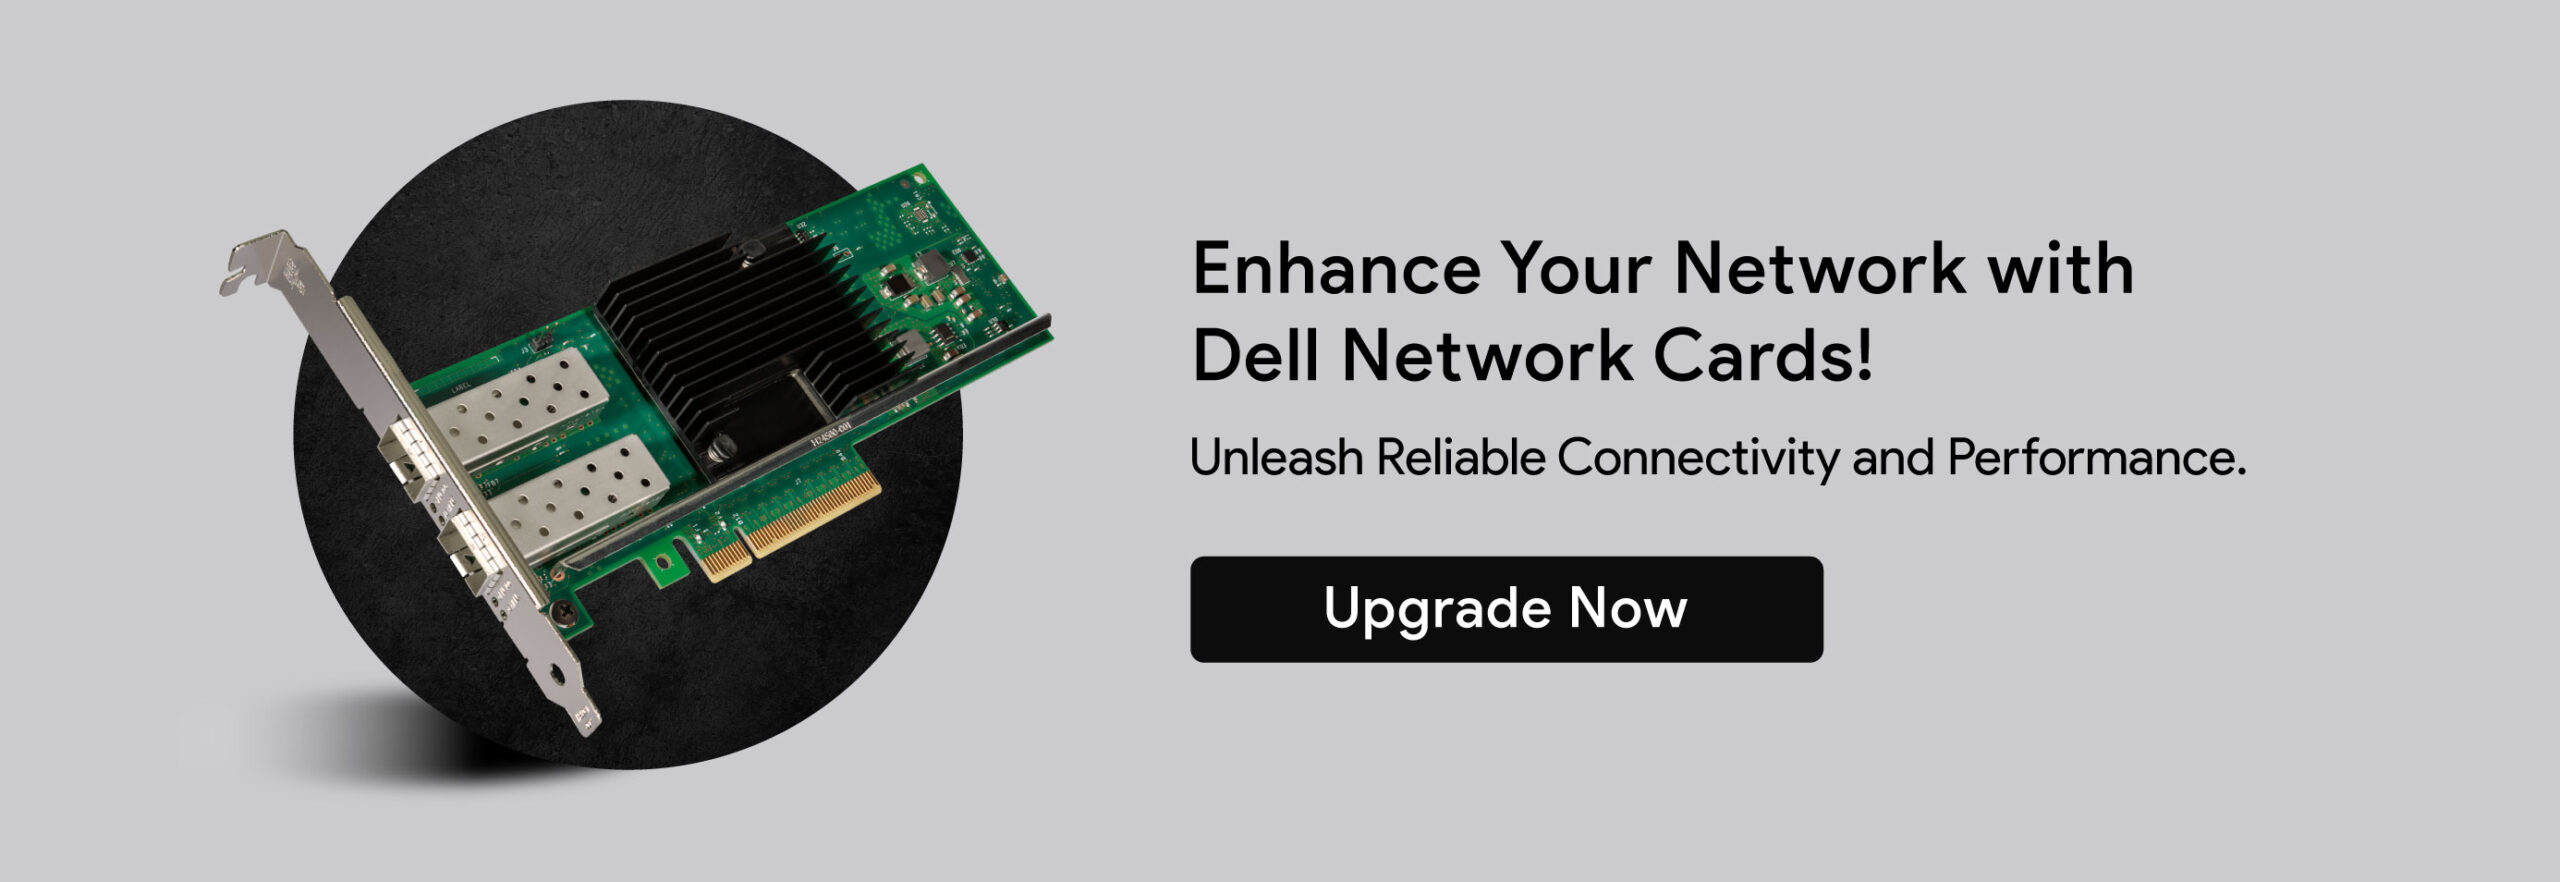 Dell-Network-Cards